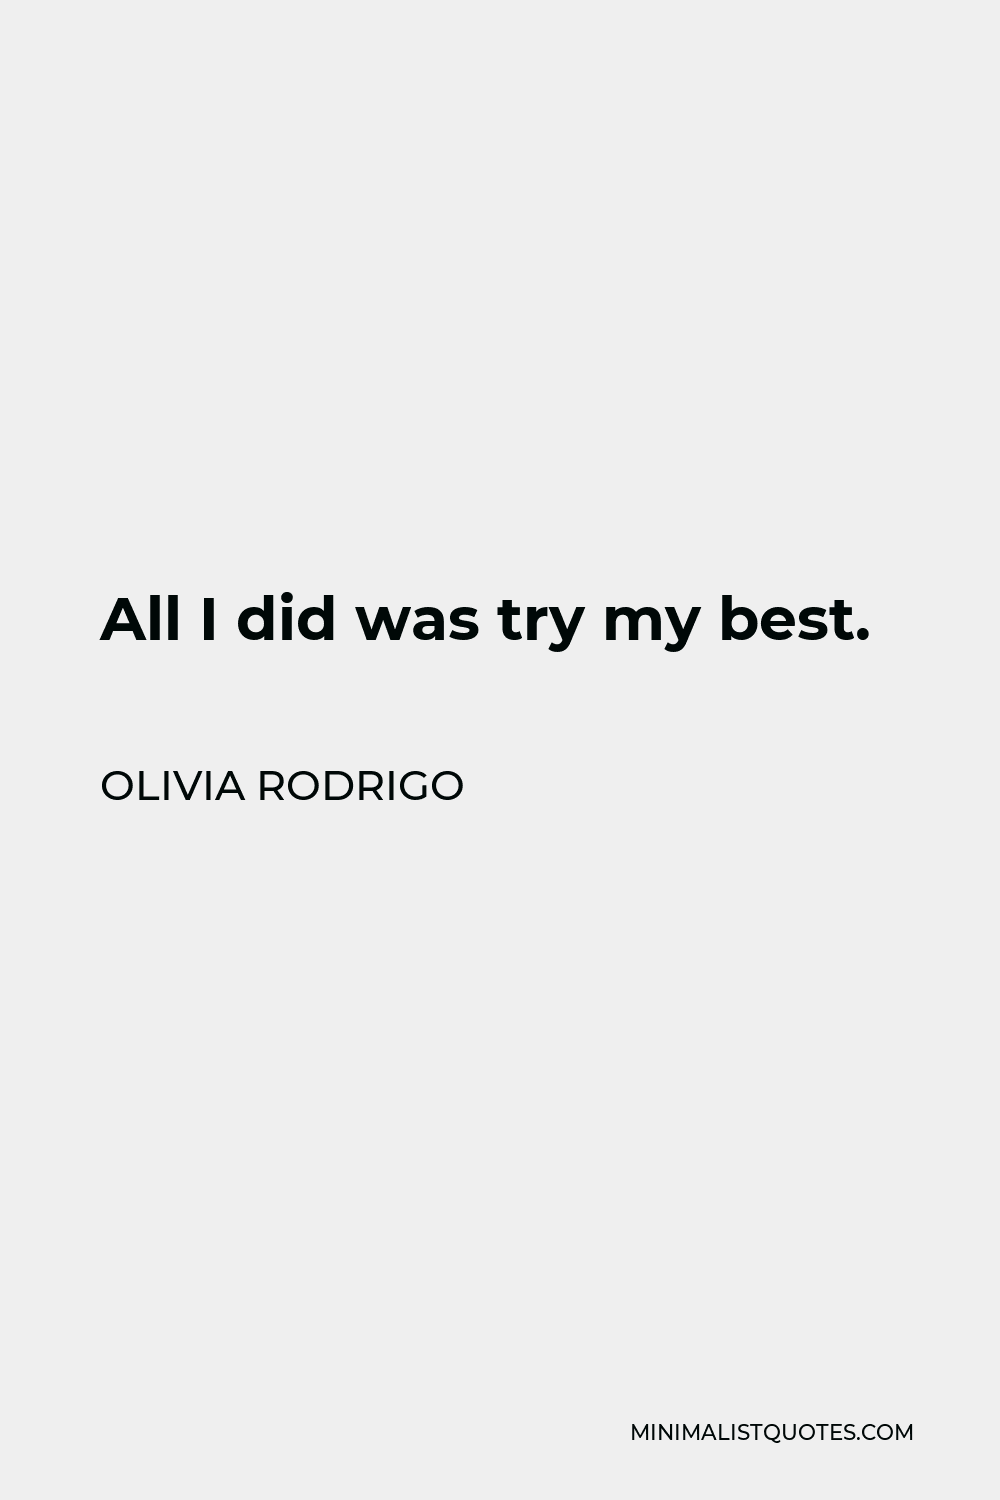 Olivia Rodrigo Quote - All I did was try my best.